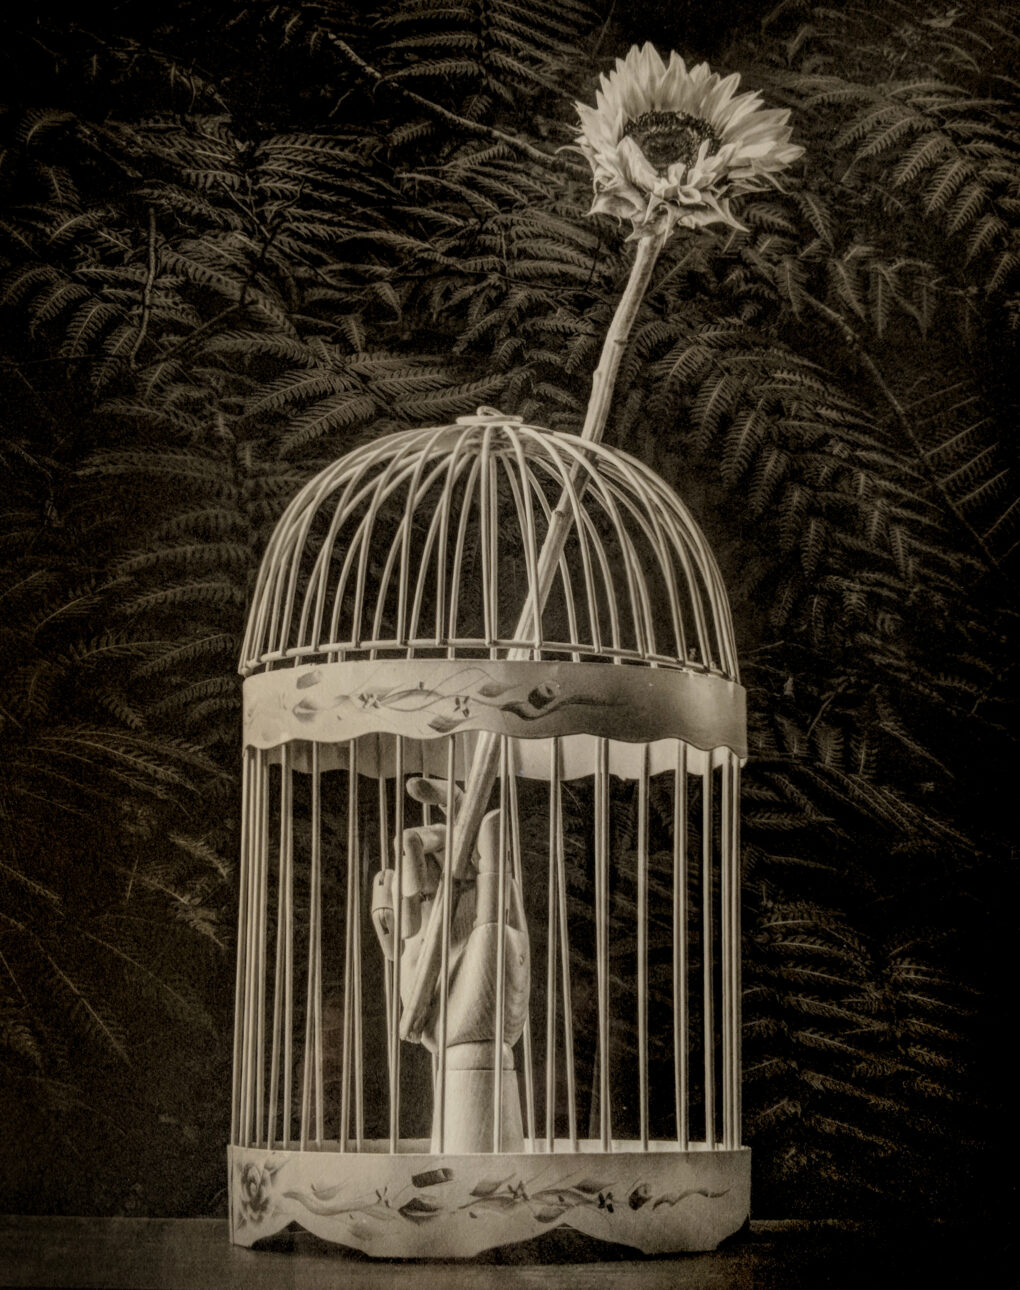 Platinum photograph of a hand in a wire bird cage holding a sunflower that extends out the top of the bird cage with a dense green hedge in the background.